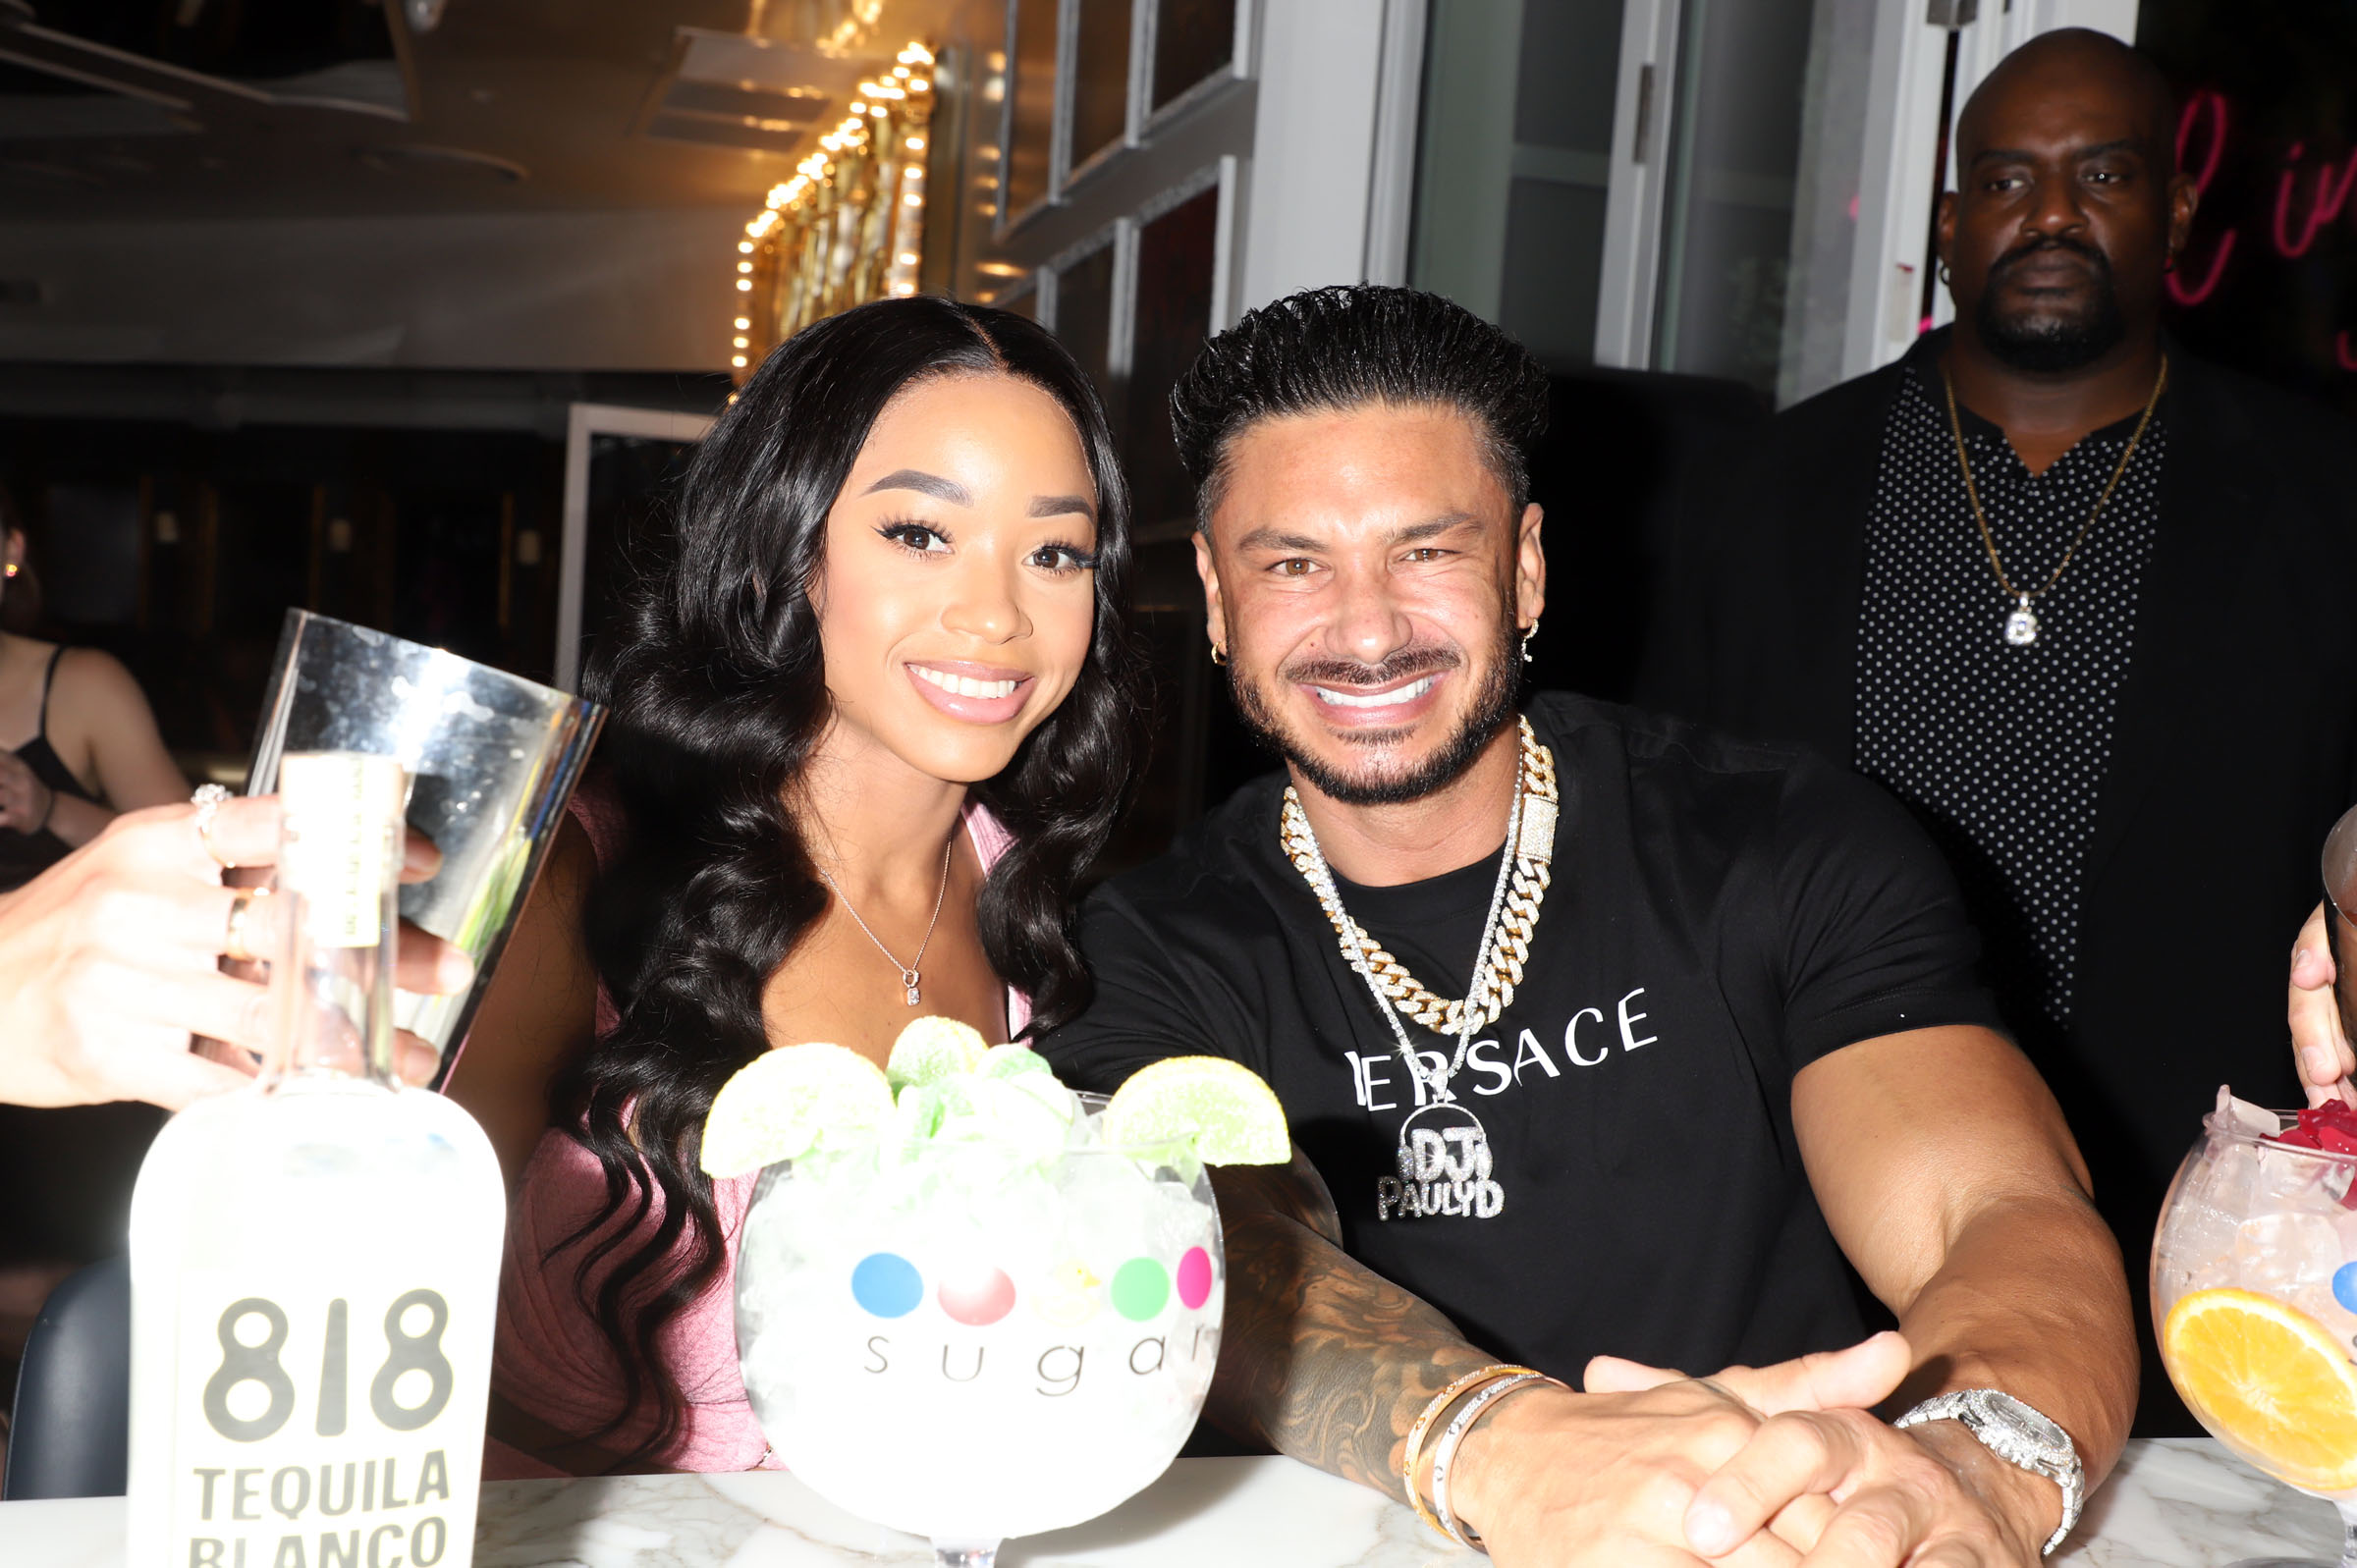 Amabella Sophia Markert, Pauly D's Daughter: 5 Fast Facts